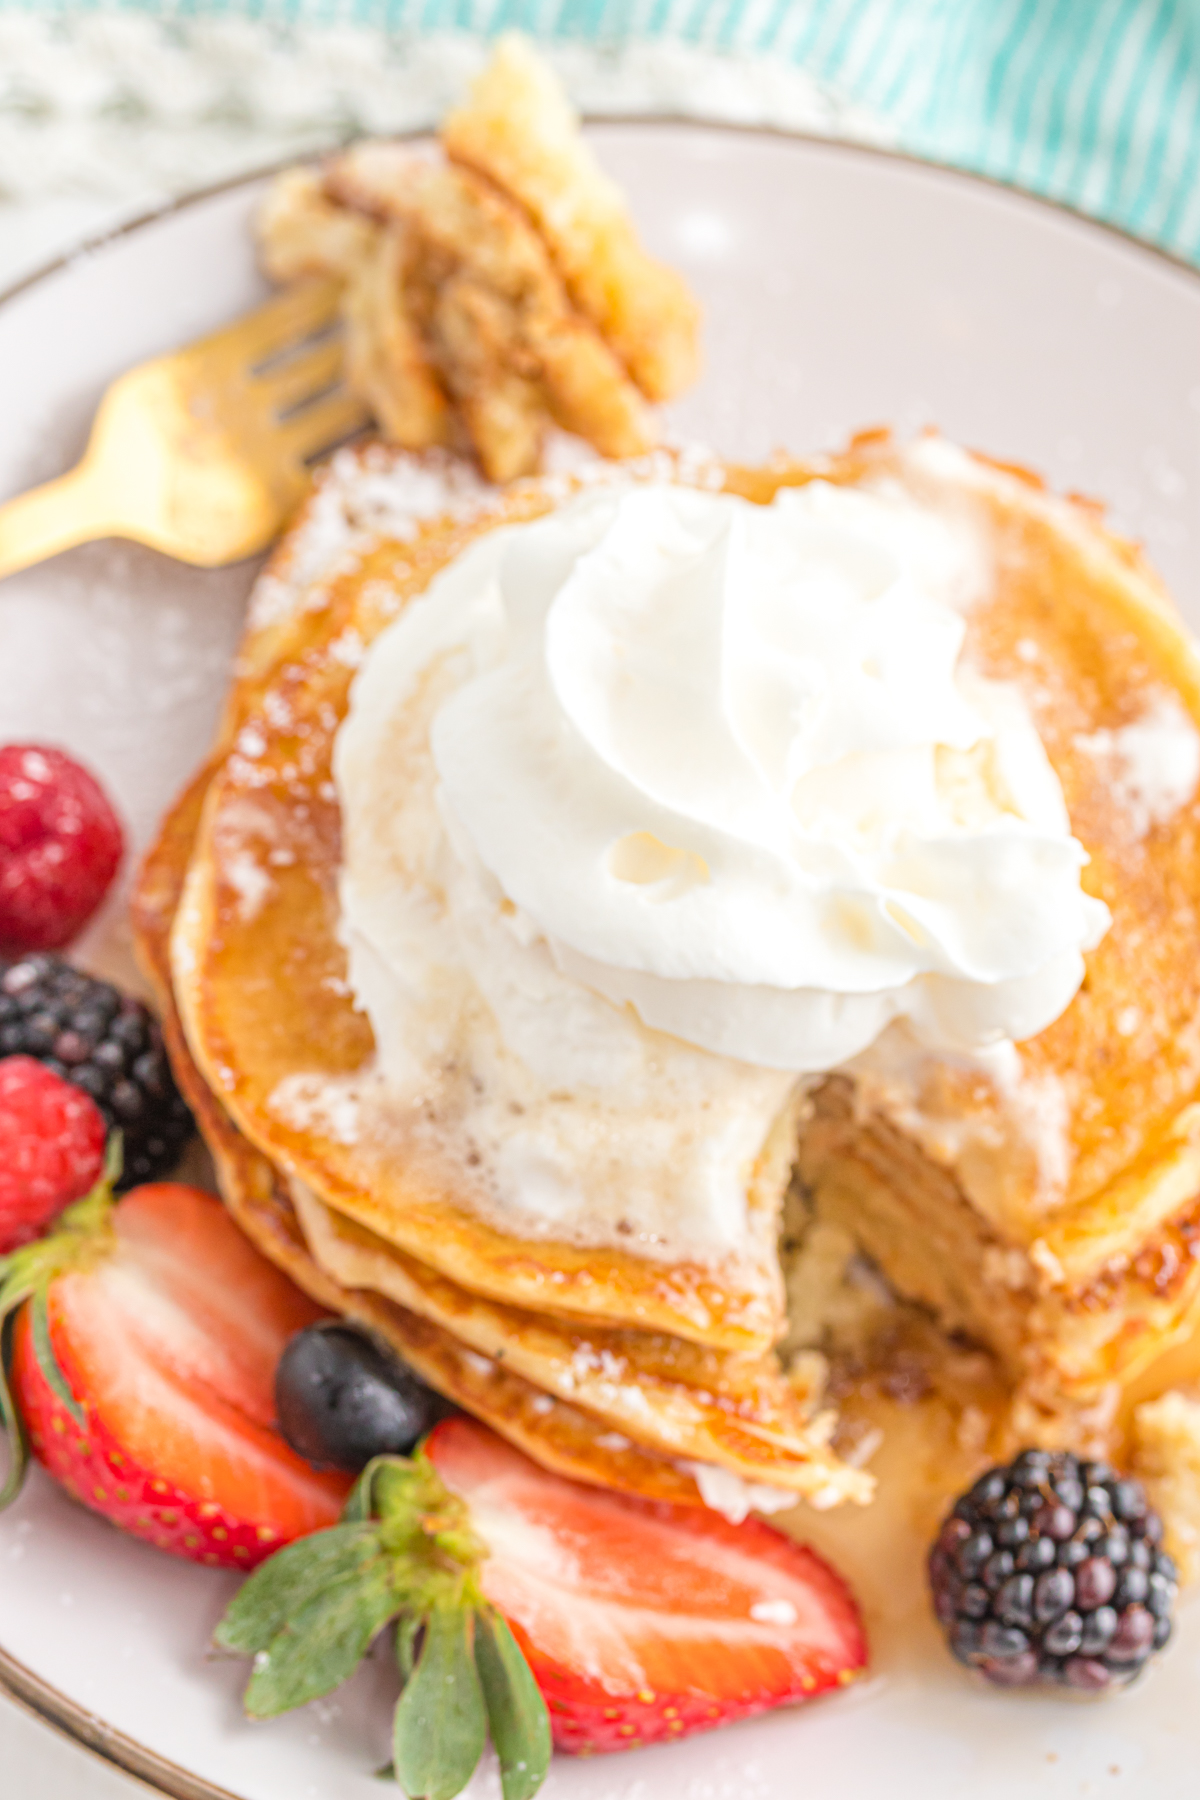 Pancakes on a plate topped with whipped cream.